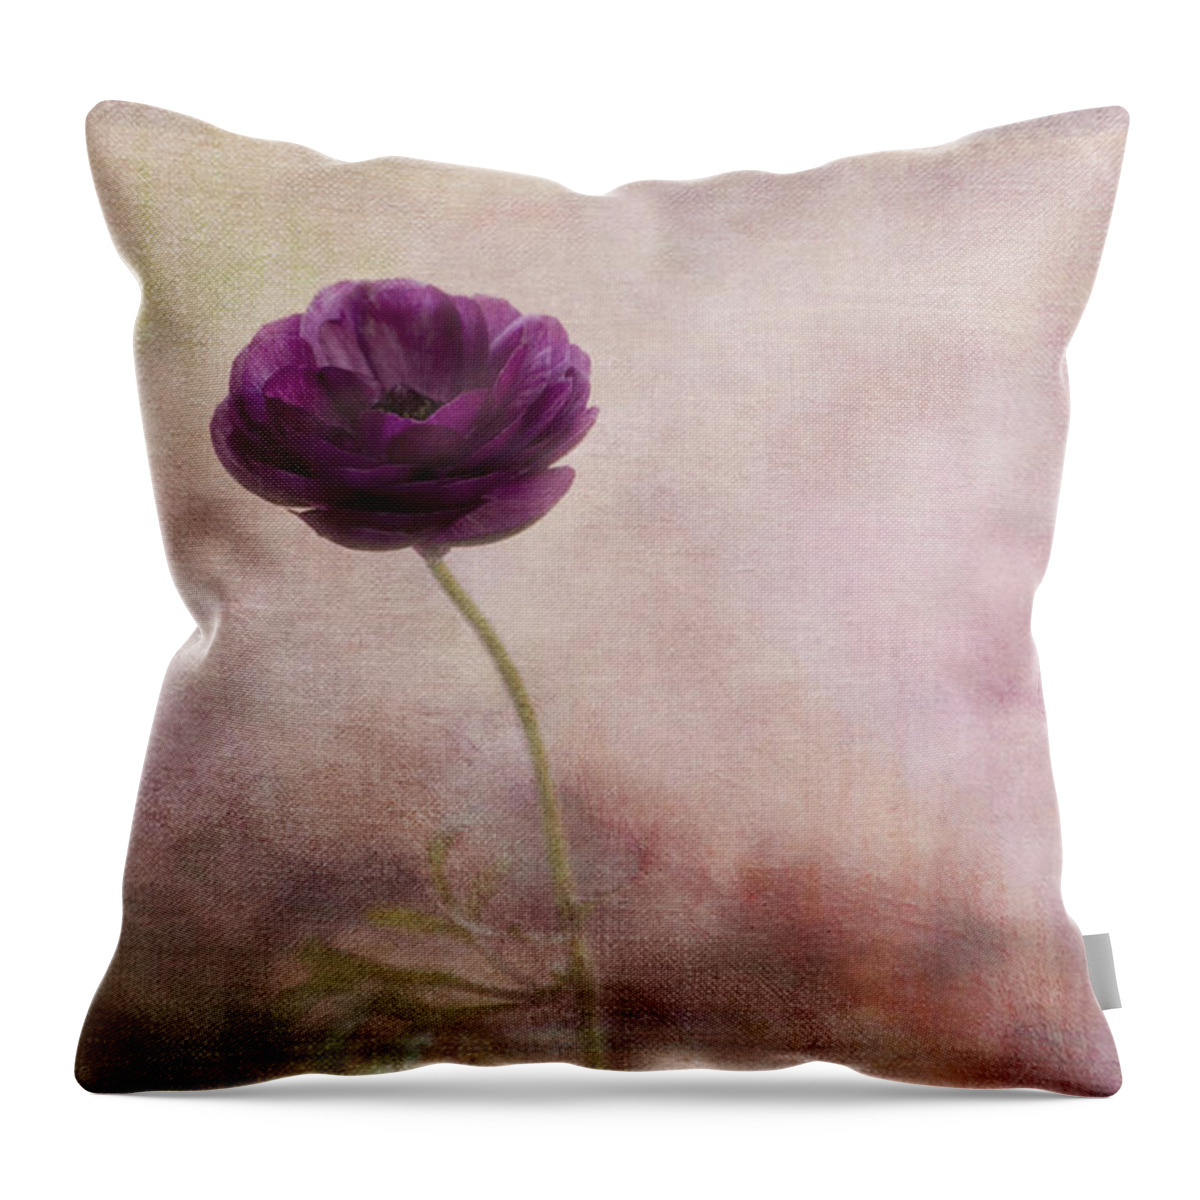 Minimalistic Throw Pillow featuring the photograph Ranuncula by Bonnie Bruno